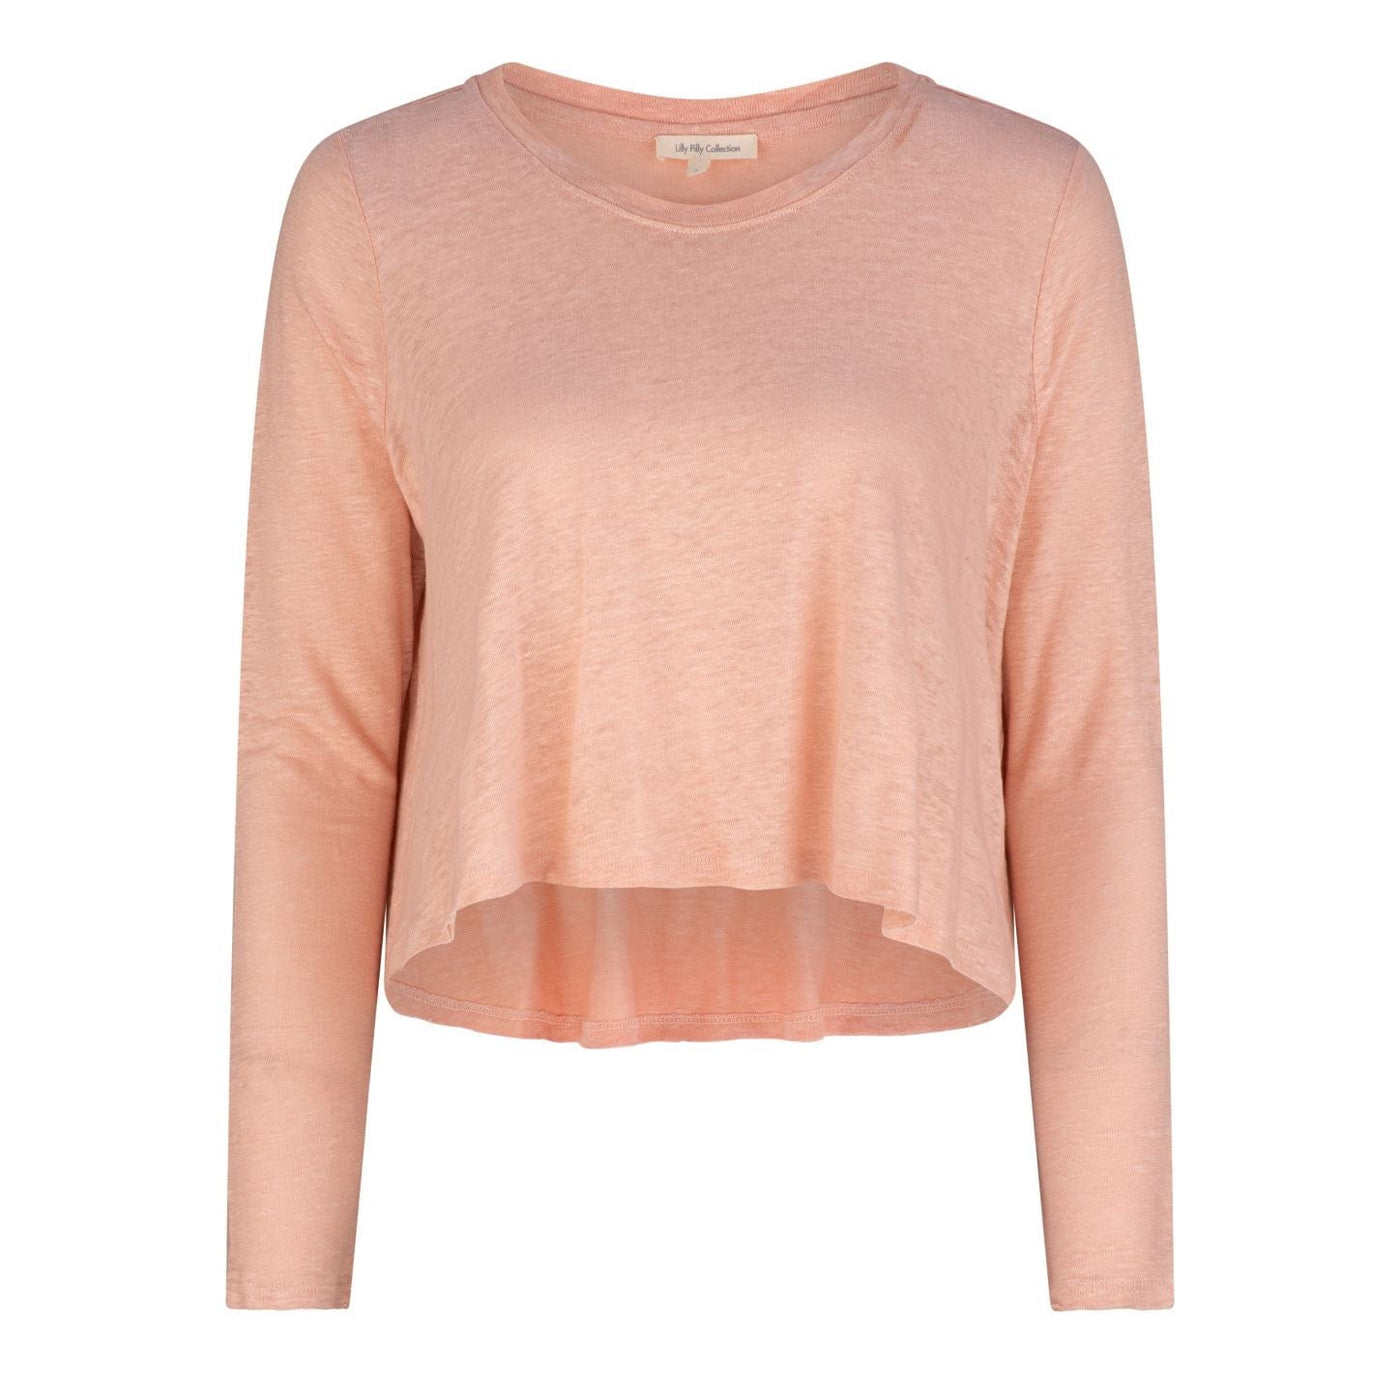 Lilly Pilly Collection 100% organic linen Elisa long sleeve t-shirt in Dusty Pink. 3D model showing front view.